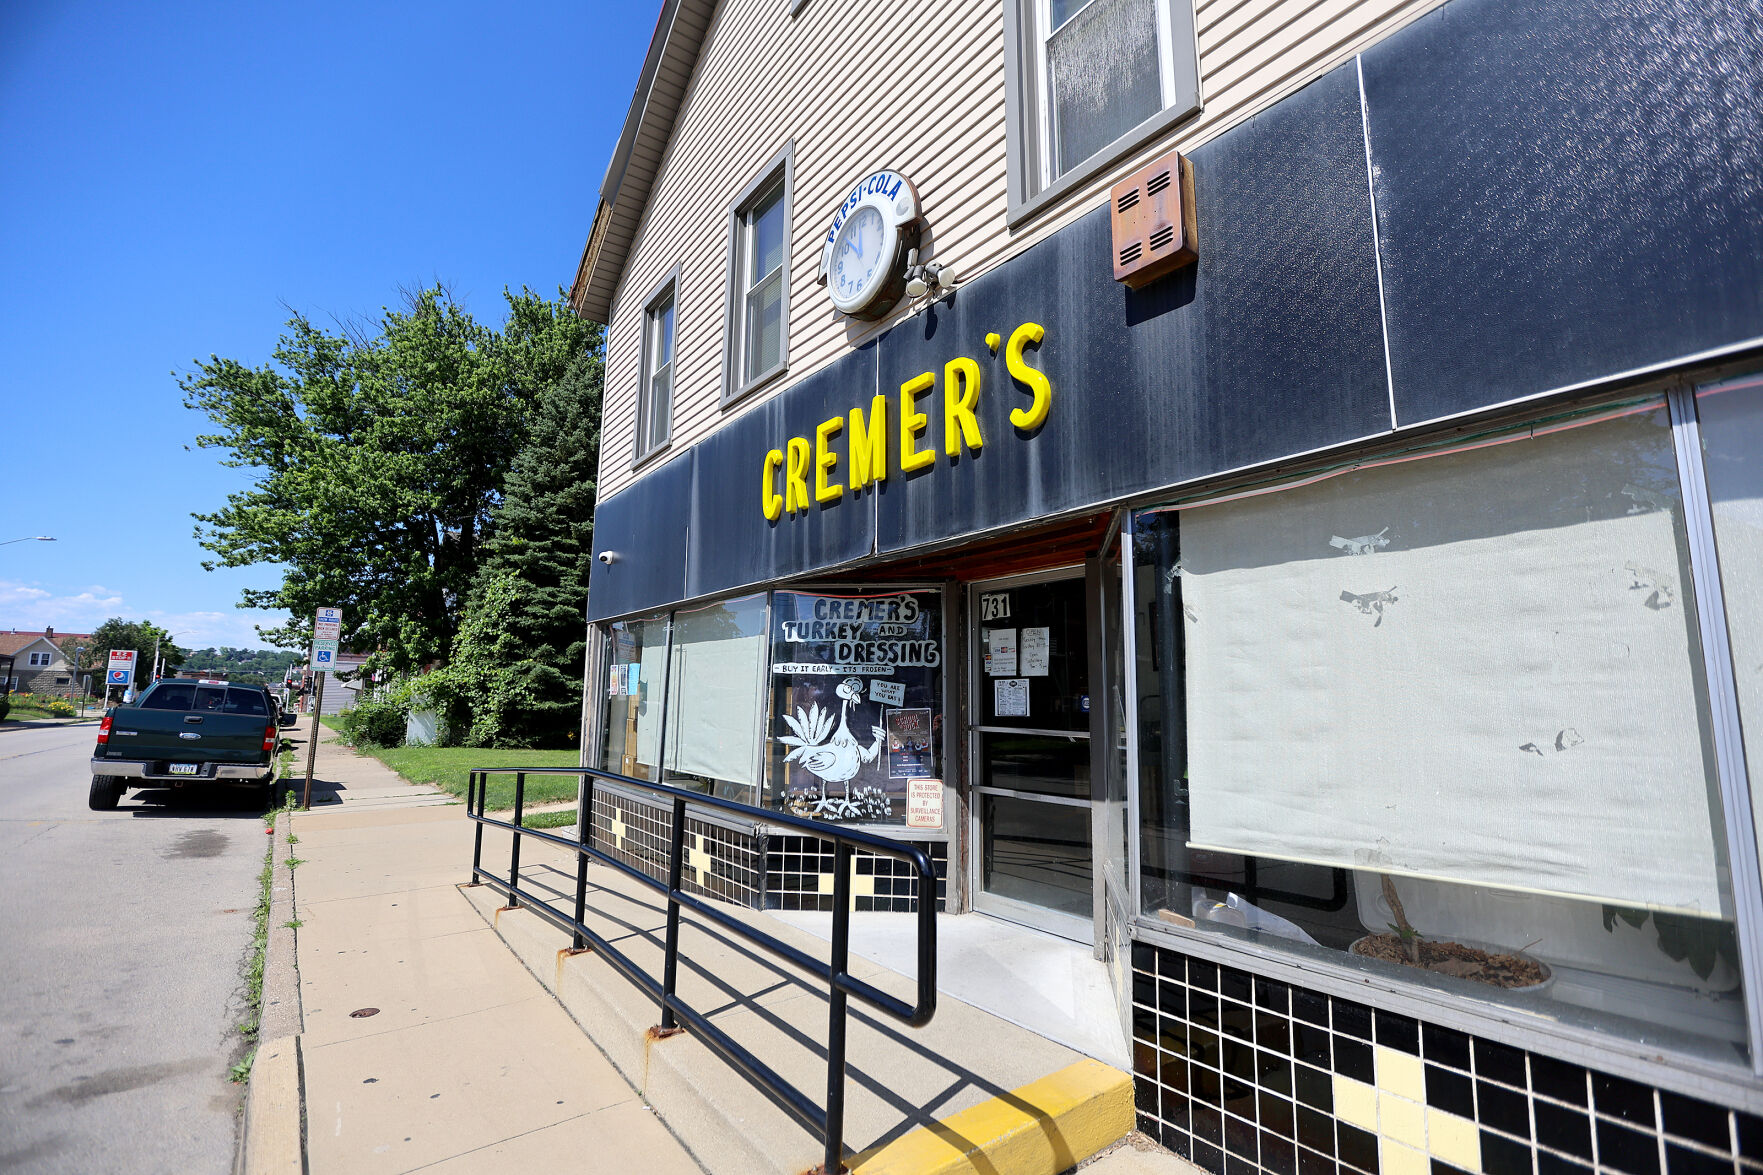 Cremer’s located on Rhomberg Avenue in Dubuque.    PHOTO CREDIT: Dave Kettering/Telegraph Herald